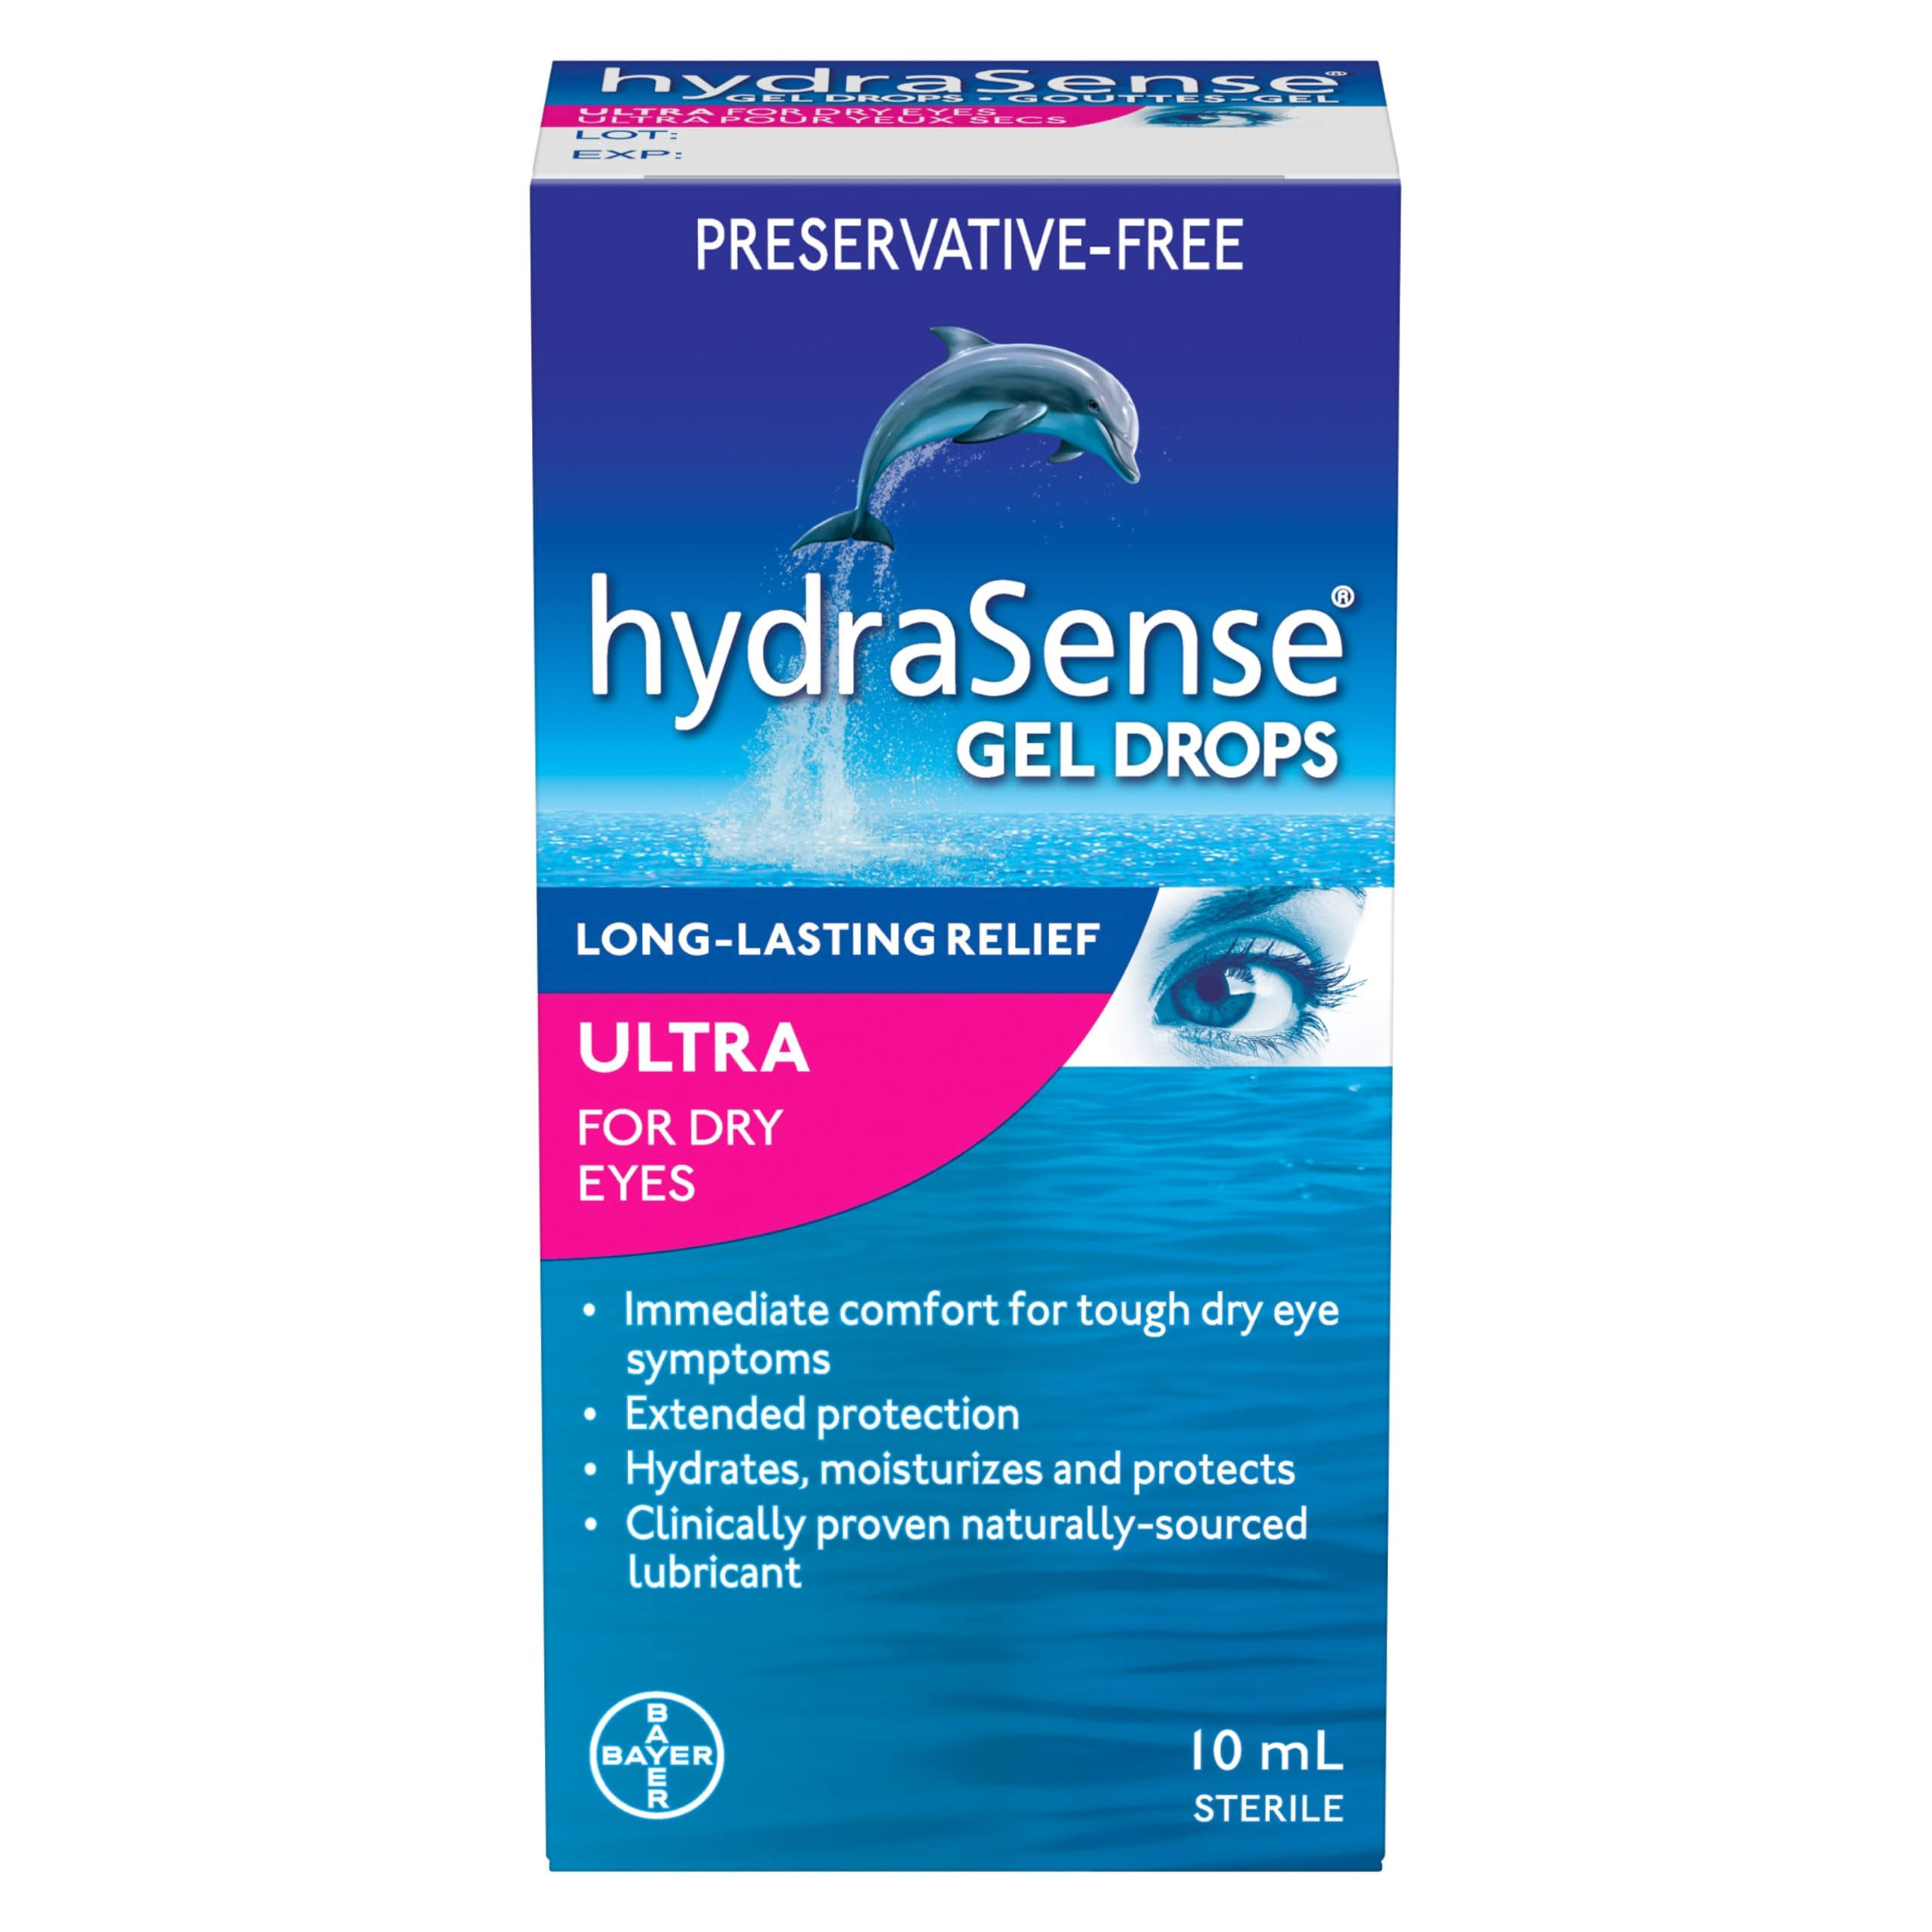 HydraSense Ultra Eye Drops for Dry Eyes, Fast Long-Lasting Relief, Preservative-Free, 10ml